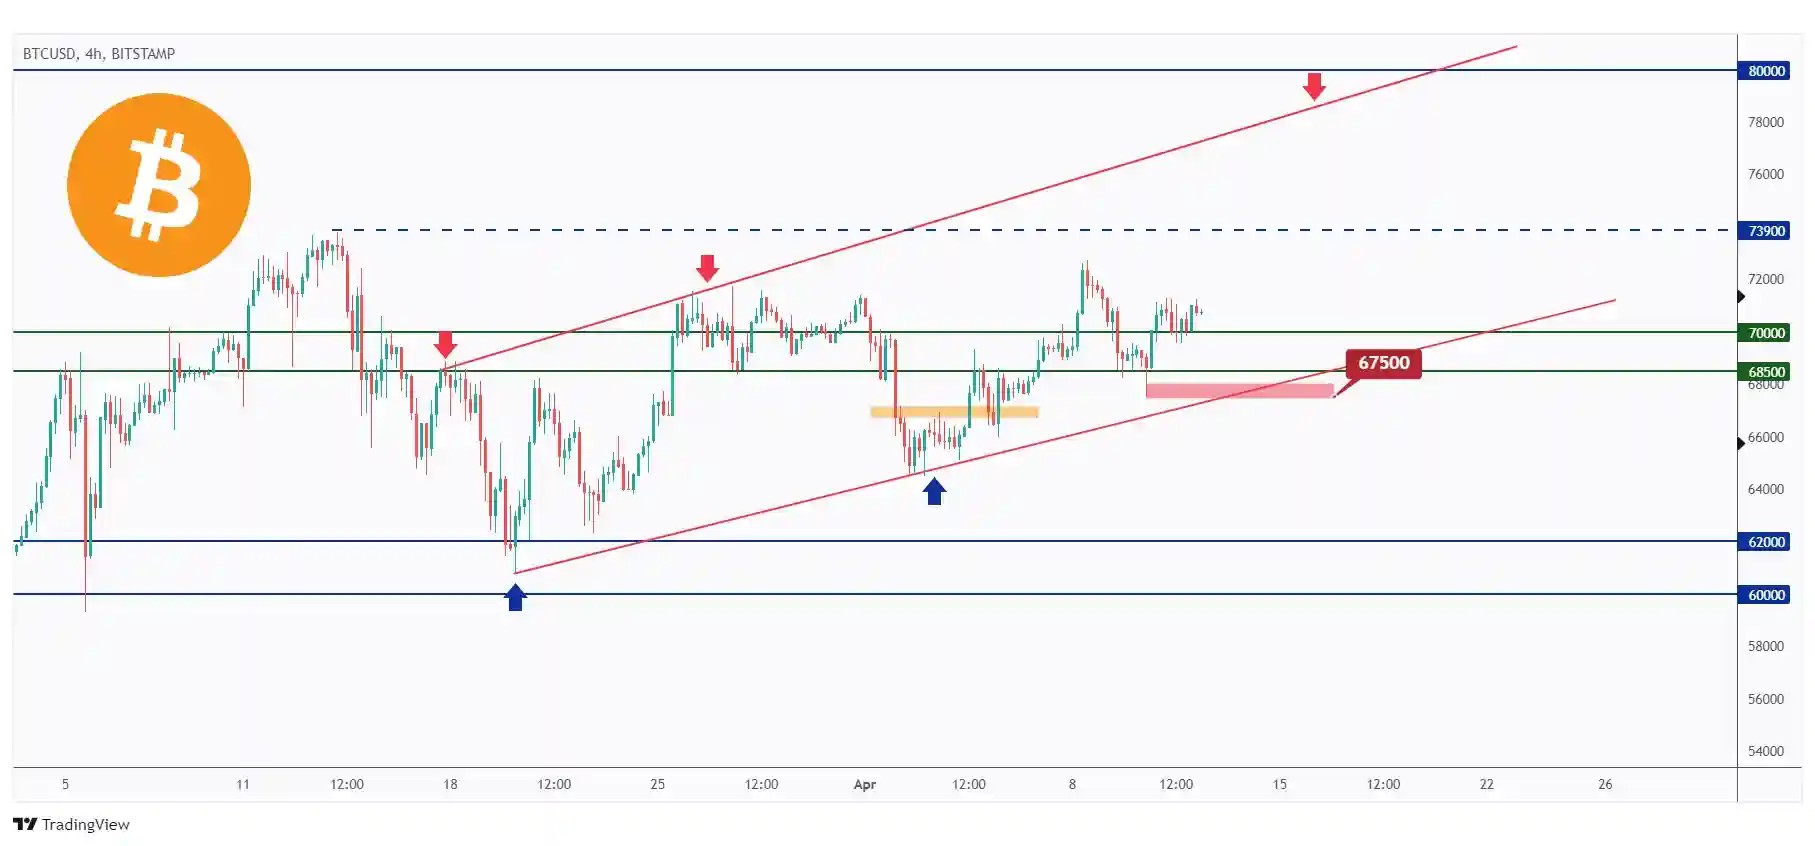 BTC 4H chart overall bullish trading within the rising channel in red above $70,000.